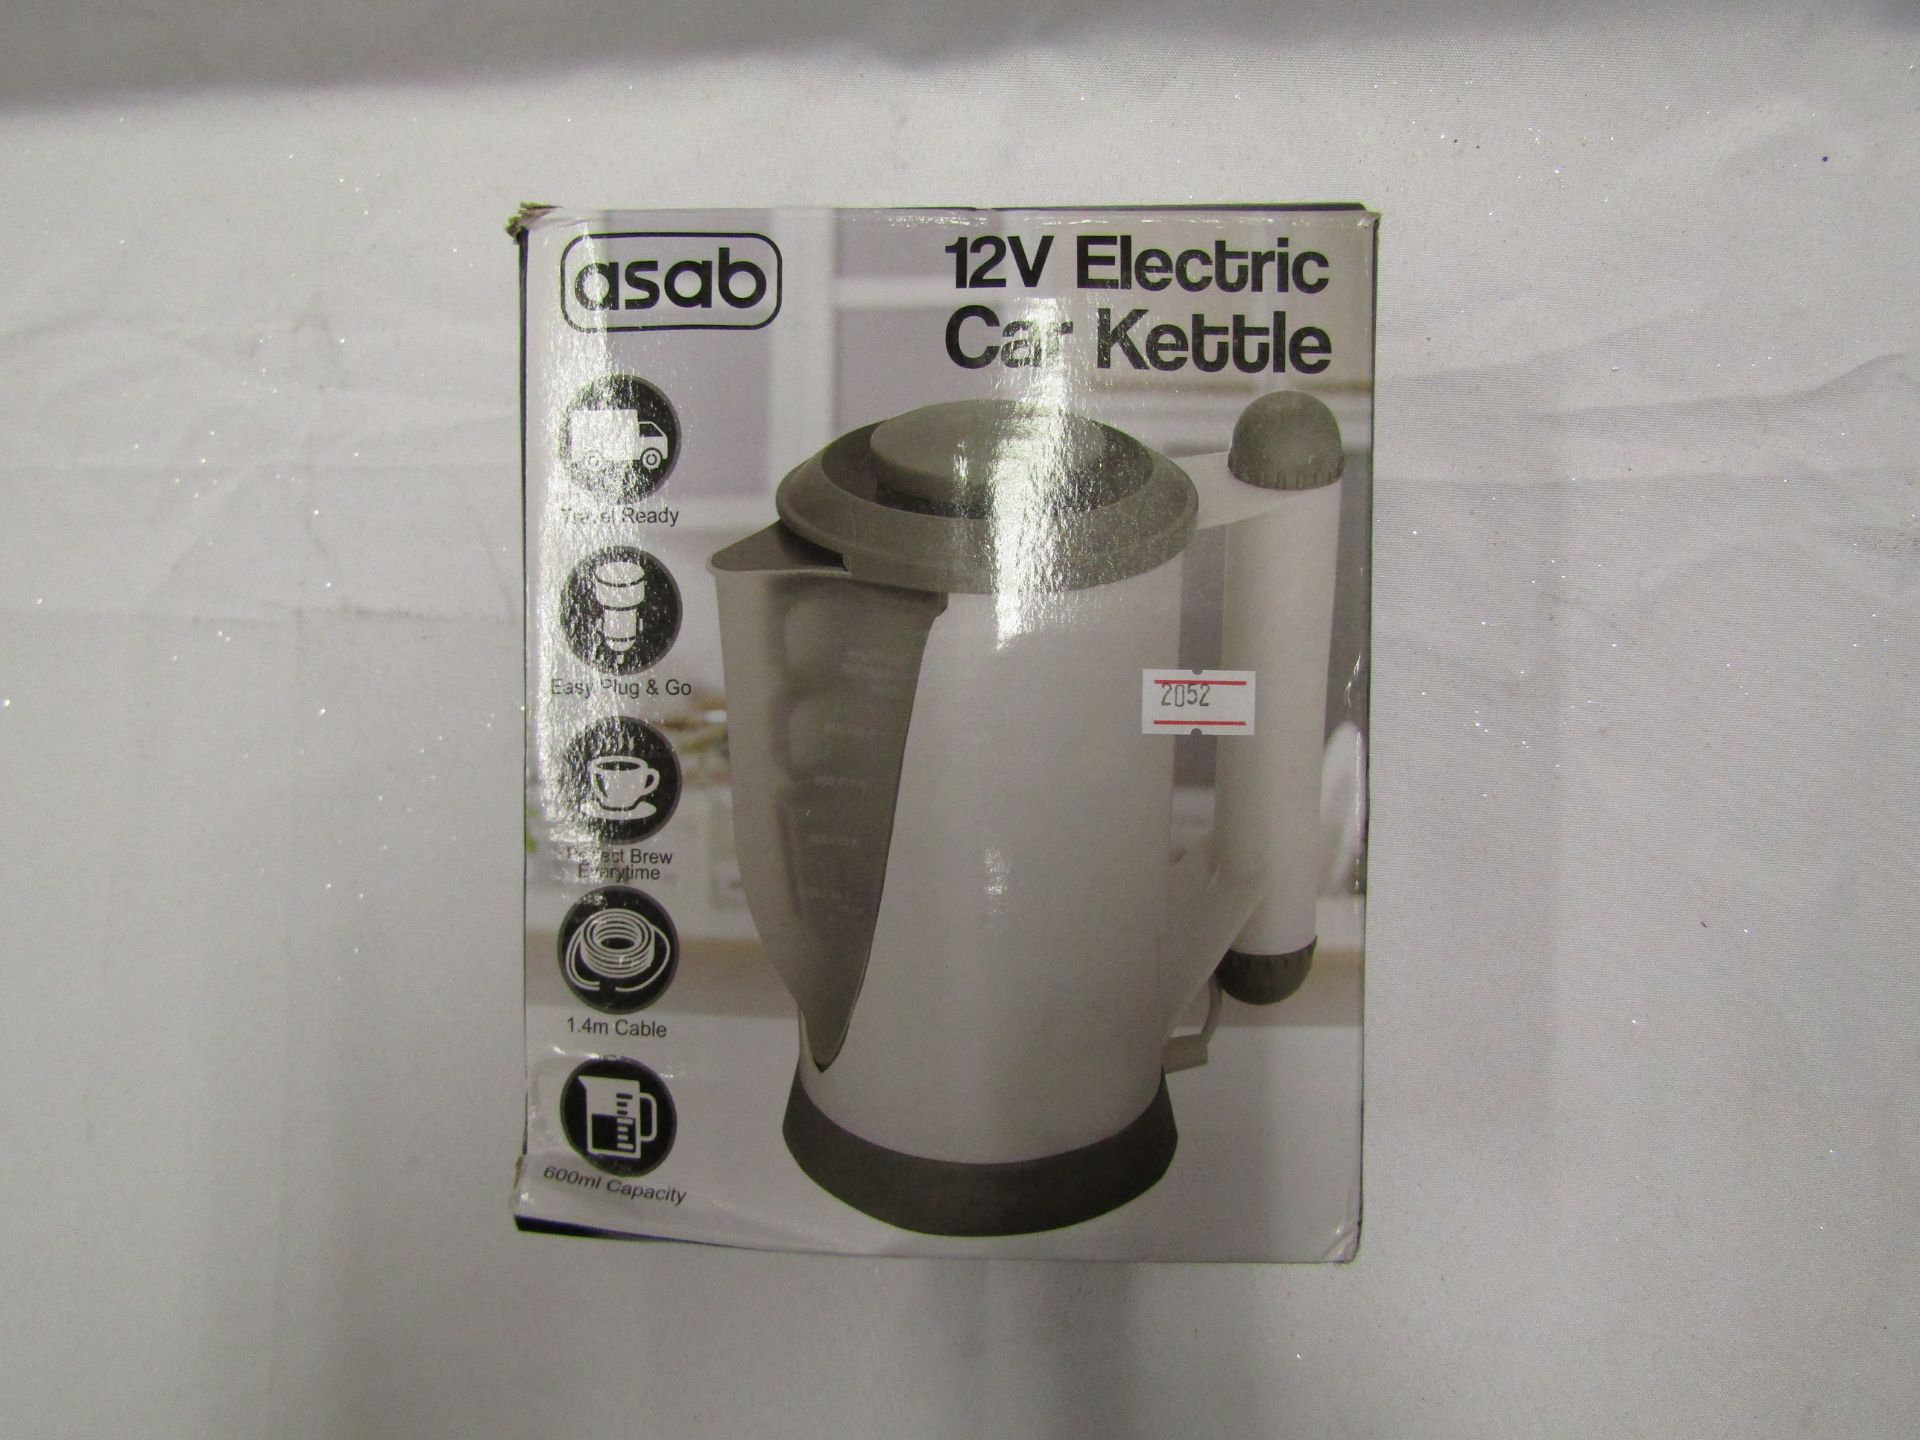 1 x Asab 12v Electric Car Kettle packaged looks new